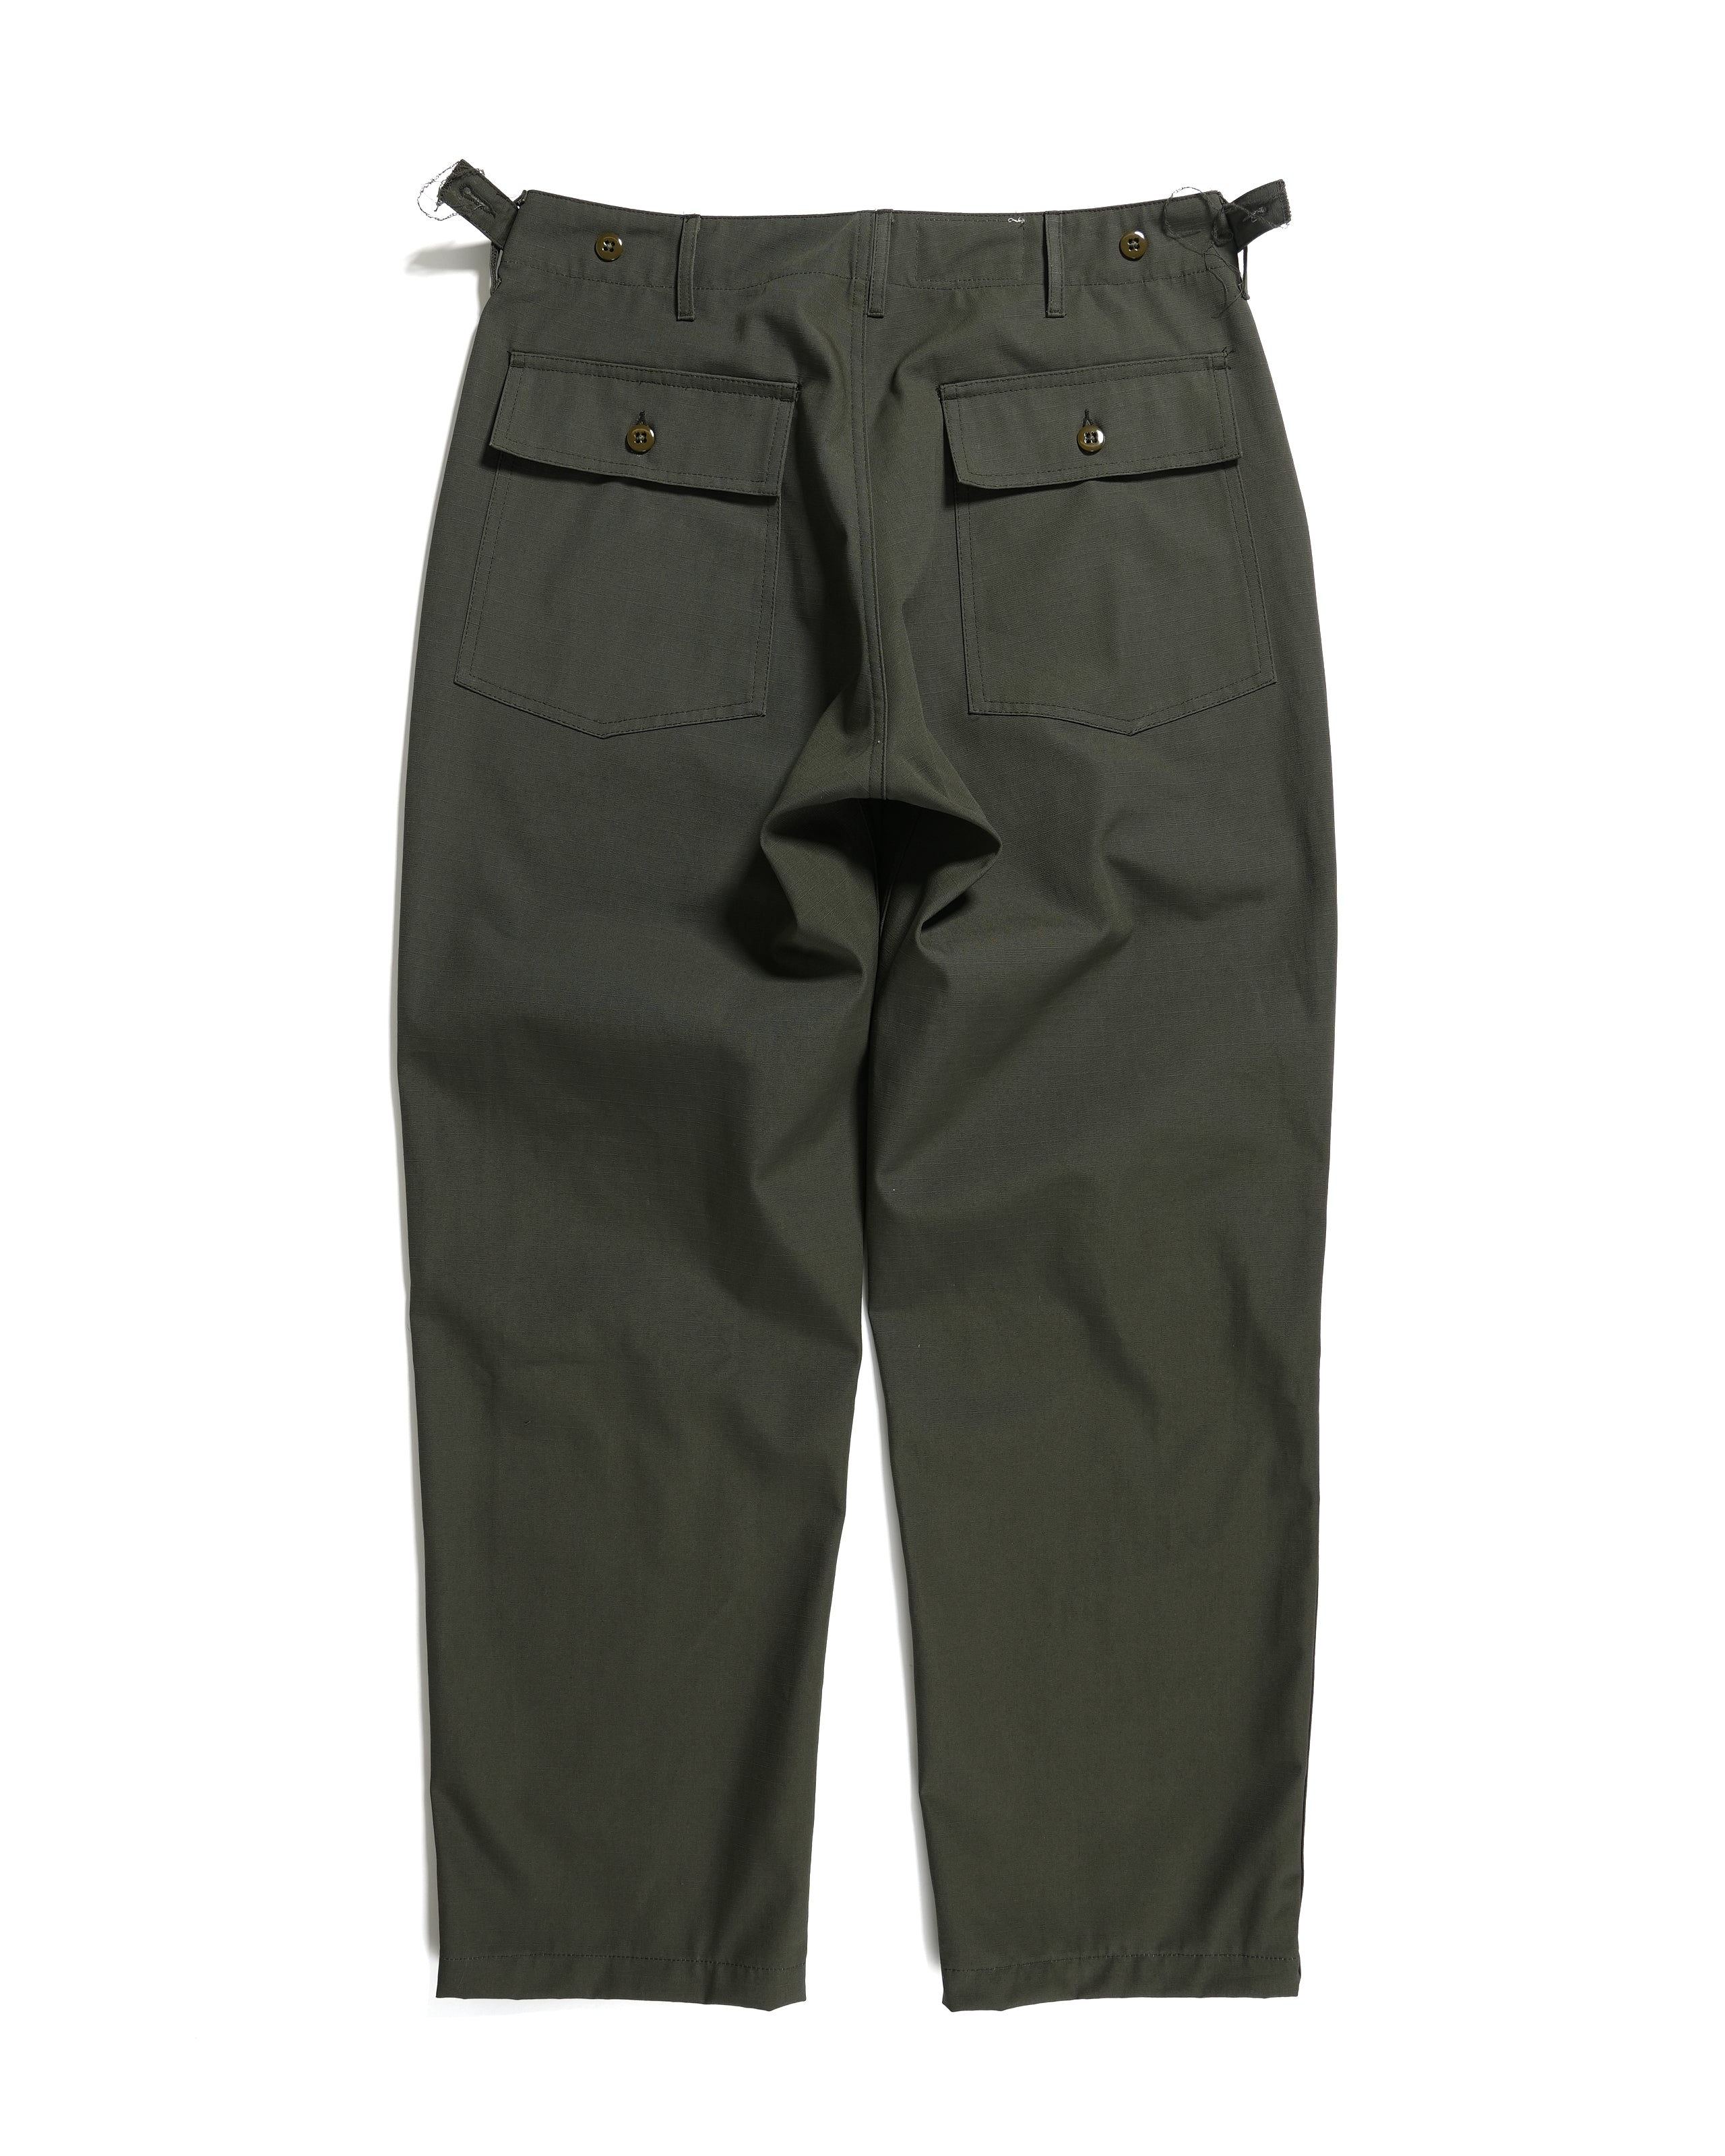 Fatigue Pant - Olive Heavyweight Cotton Ripstop